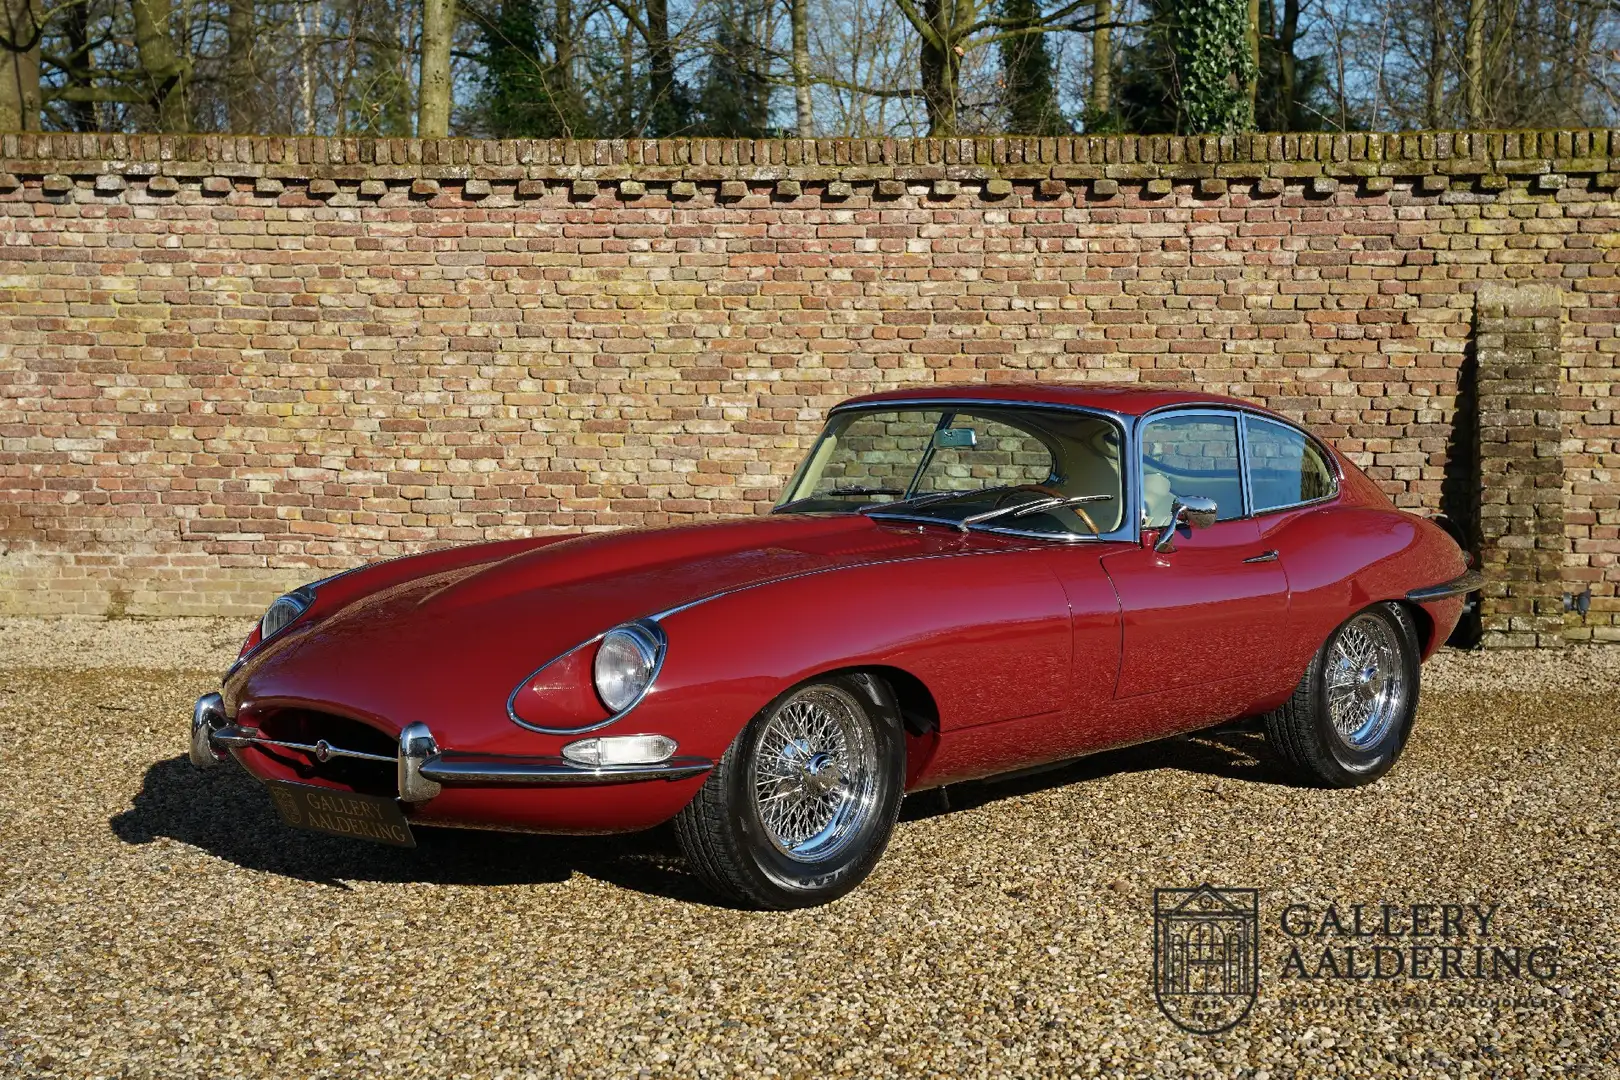 Jaguar E-Type 4.2 coupe series 1.5 Superb restored condition, Ma Red - 1